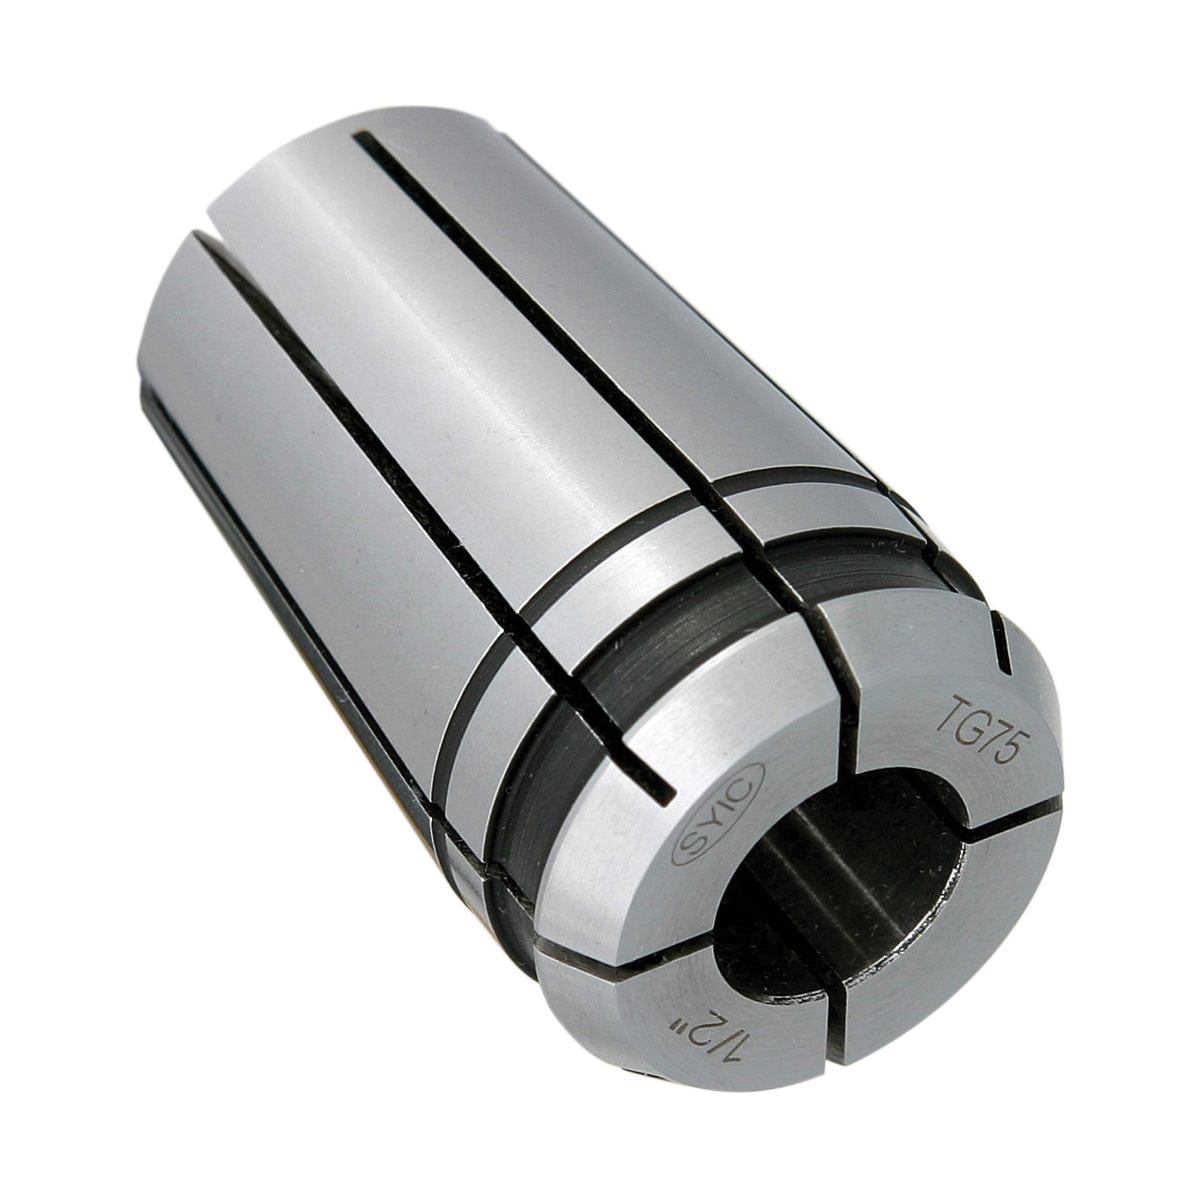 TG75 3/8" COLLET